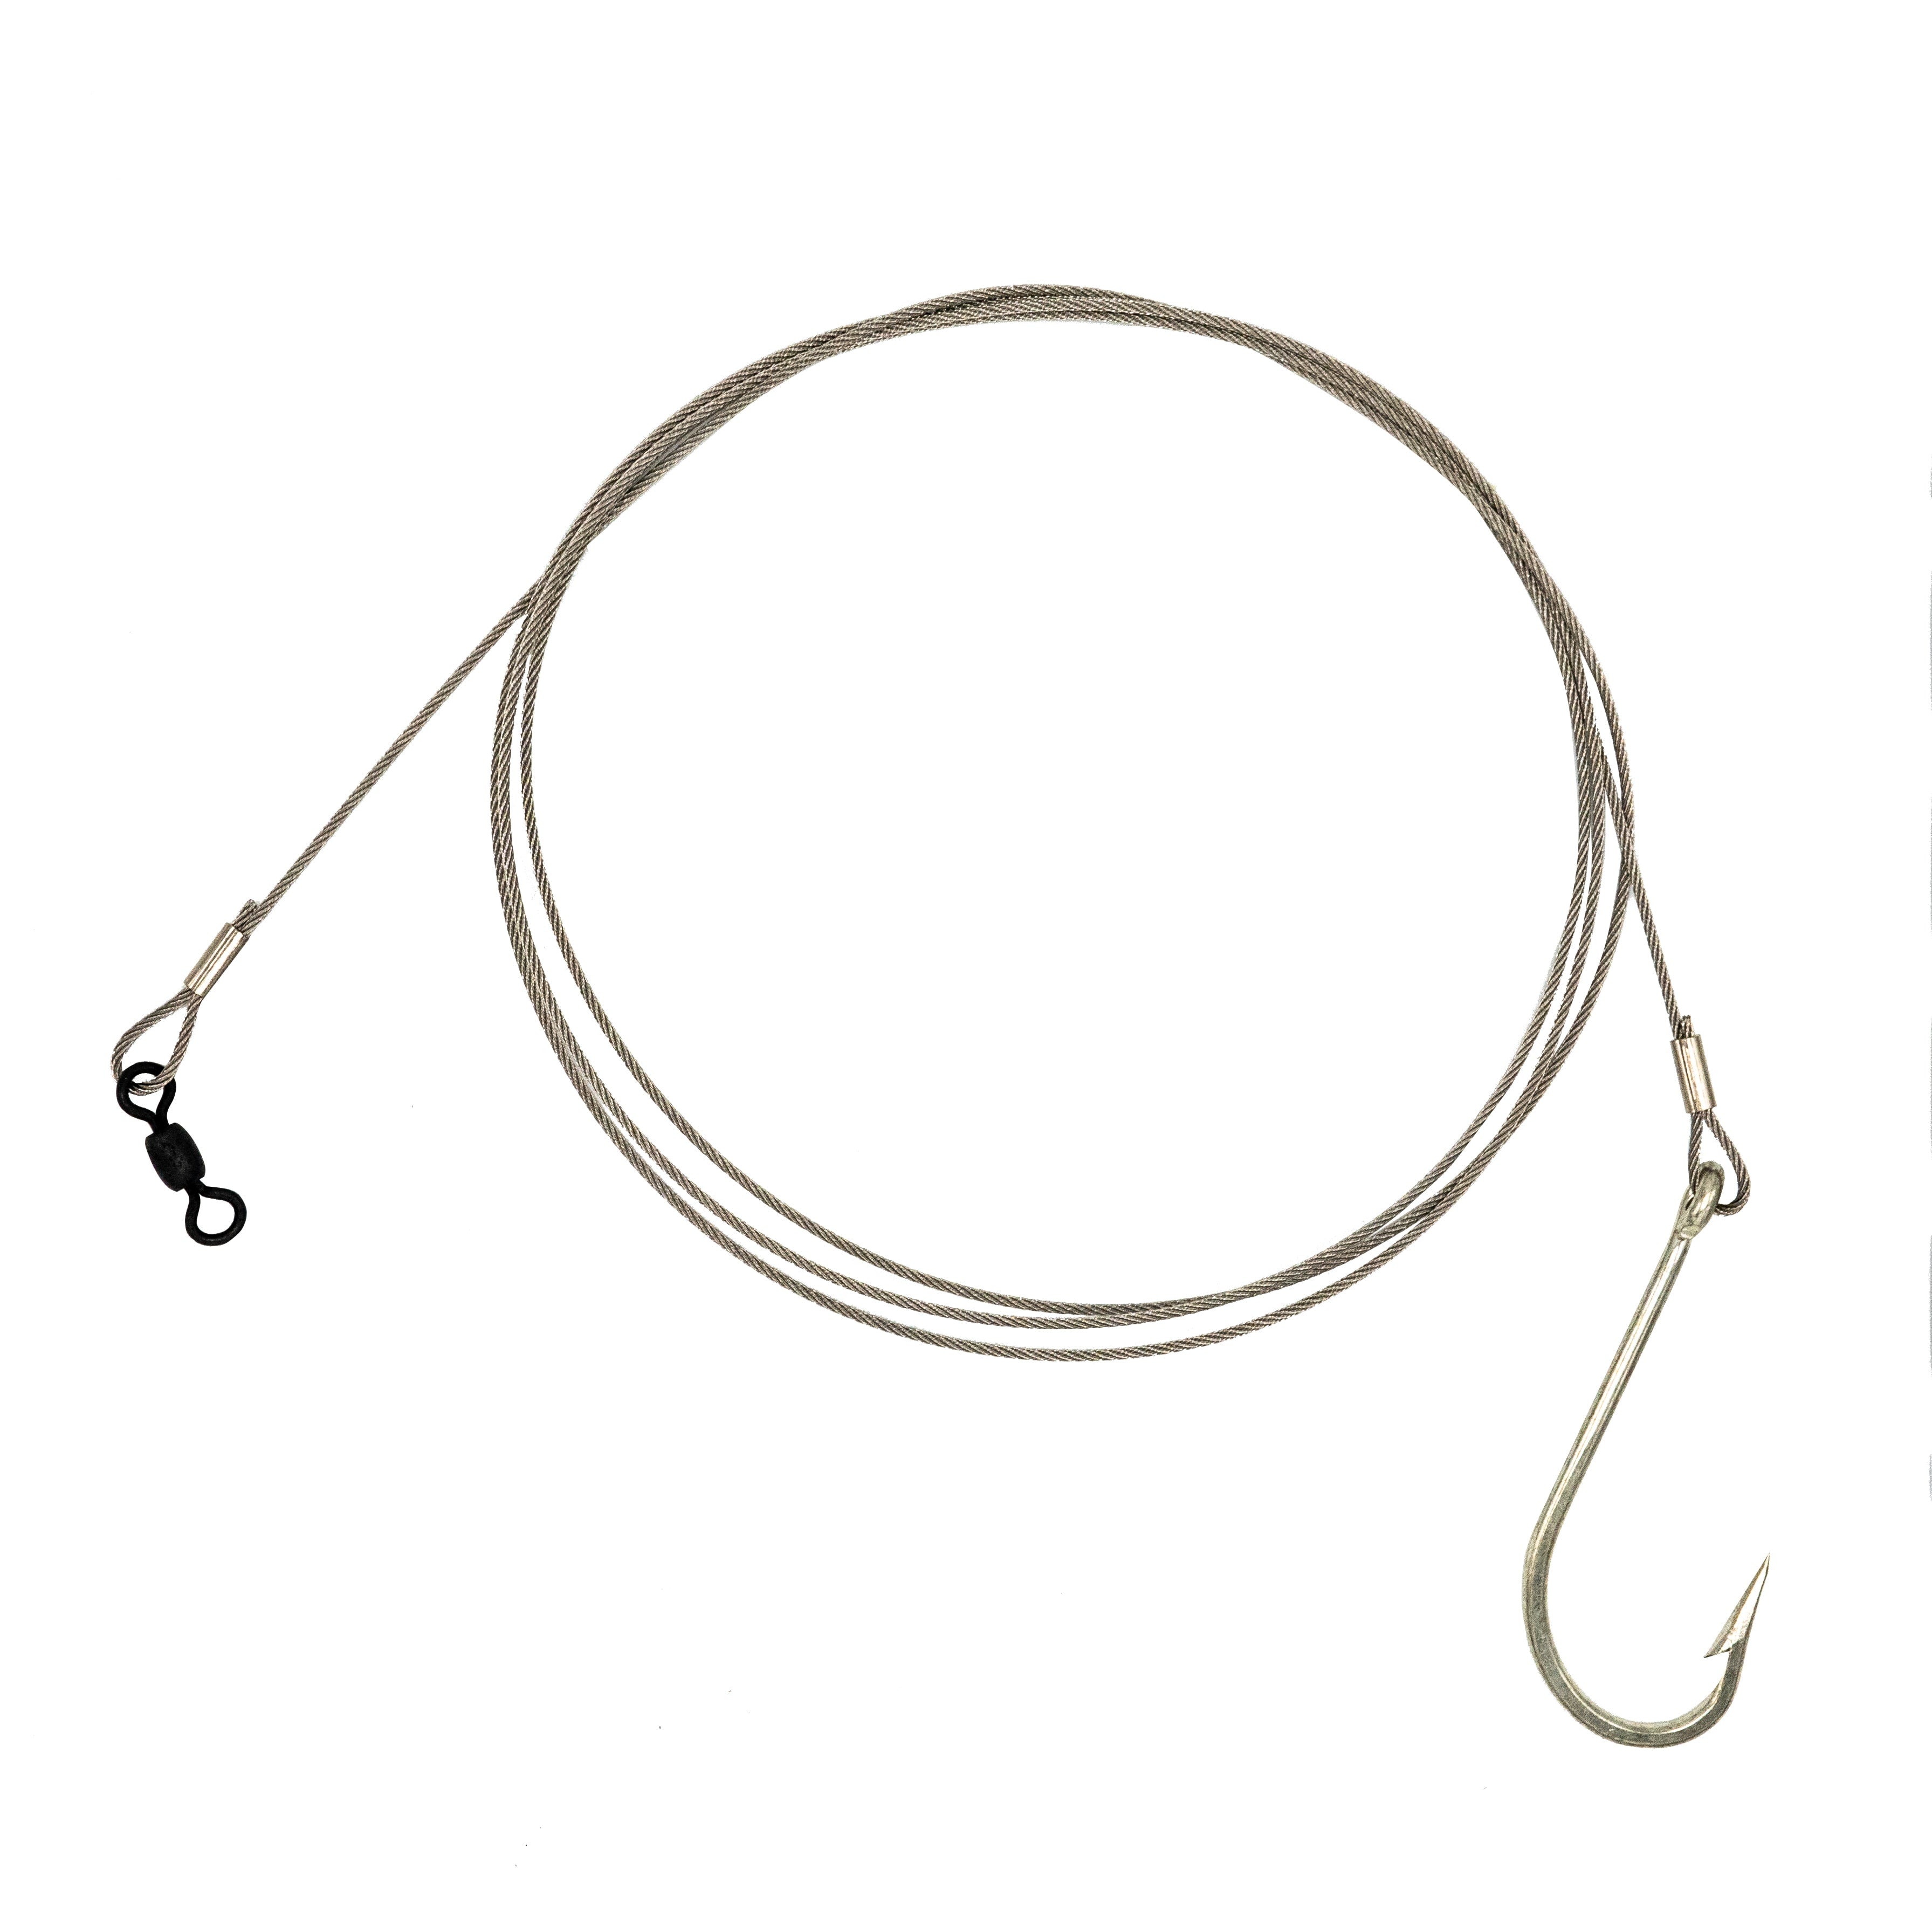 Cast Of Big Fishsaltwater Fishing Circle Hooks - Stainless Steel